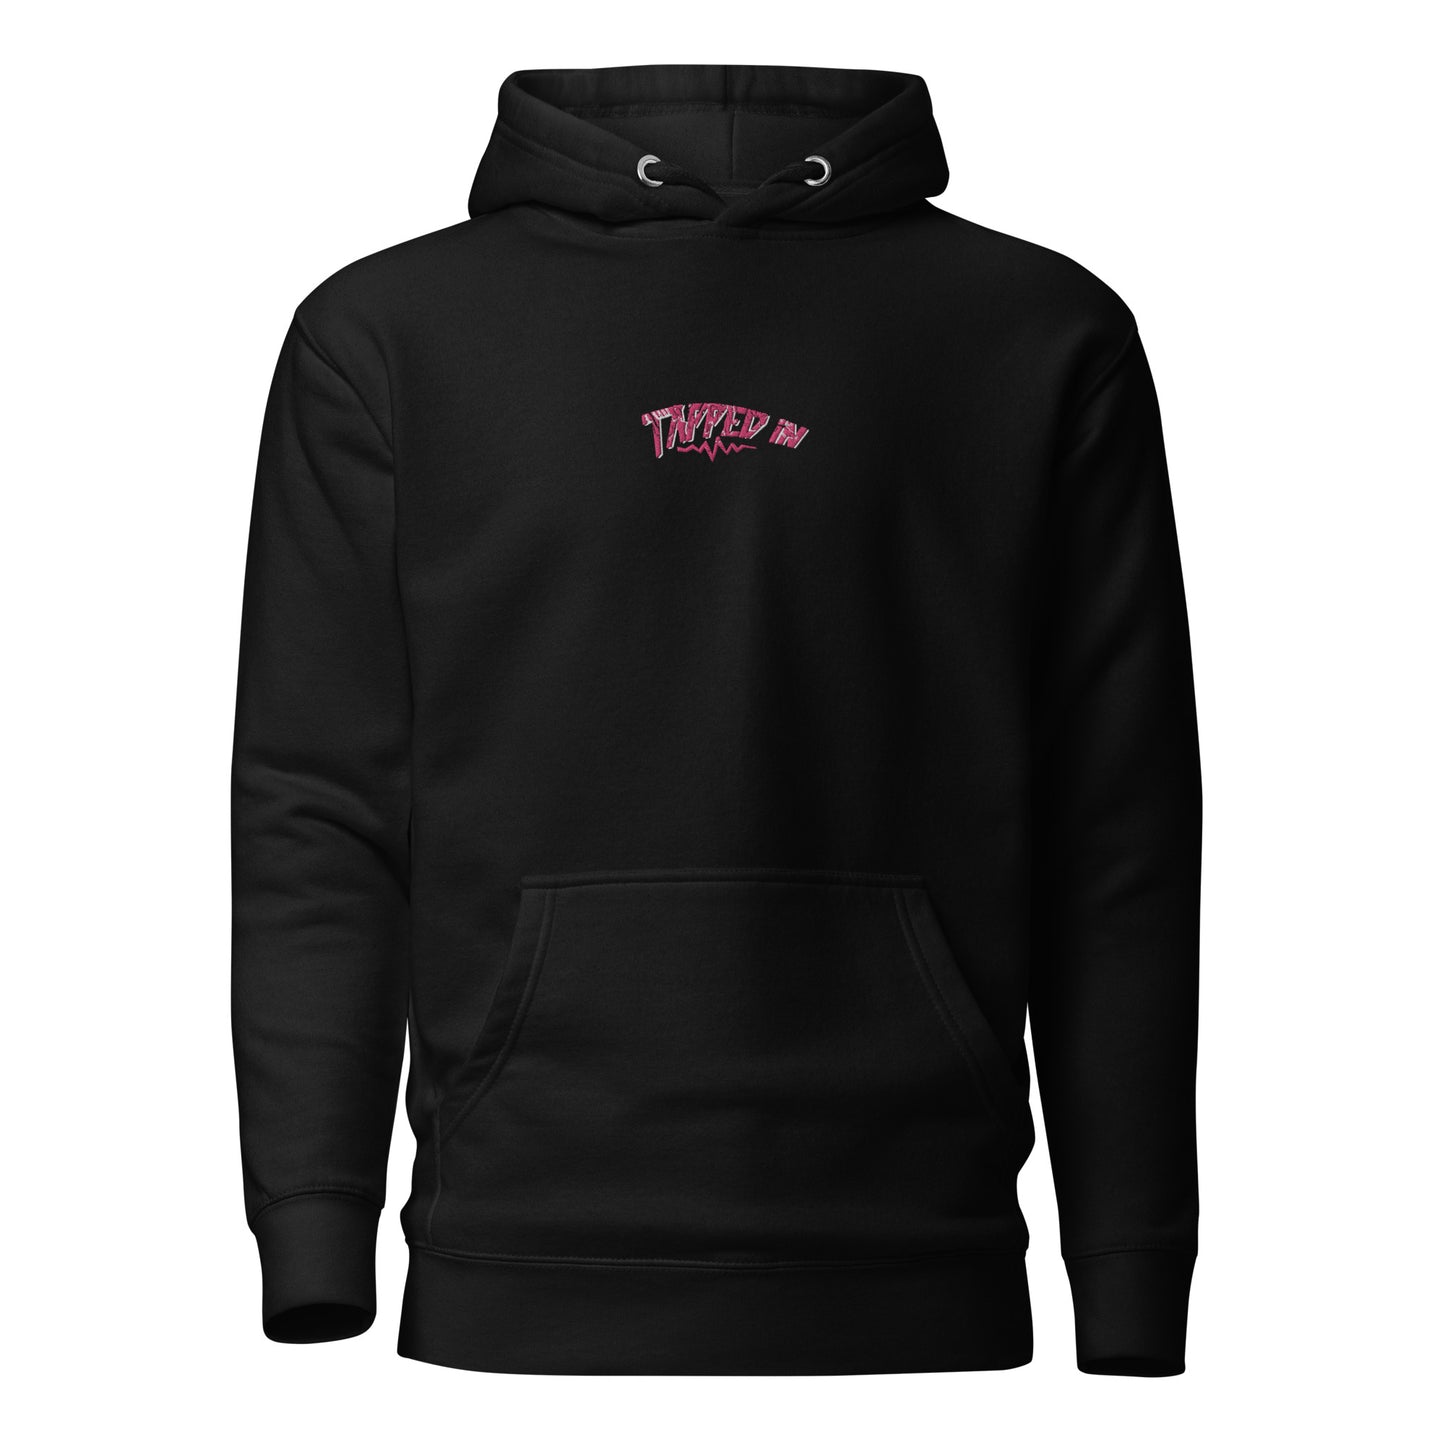 Tapped In Adrift Hoodie